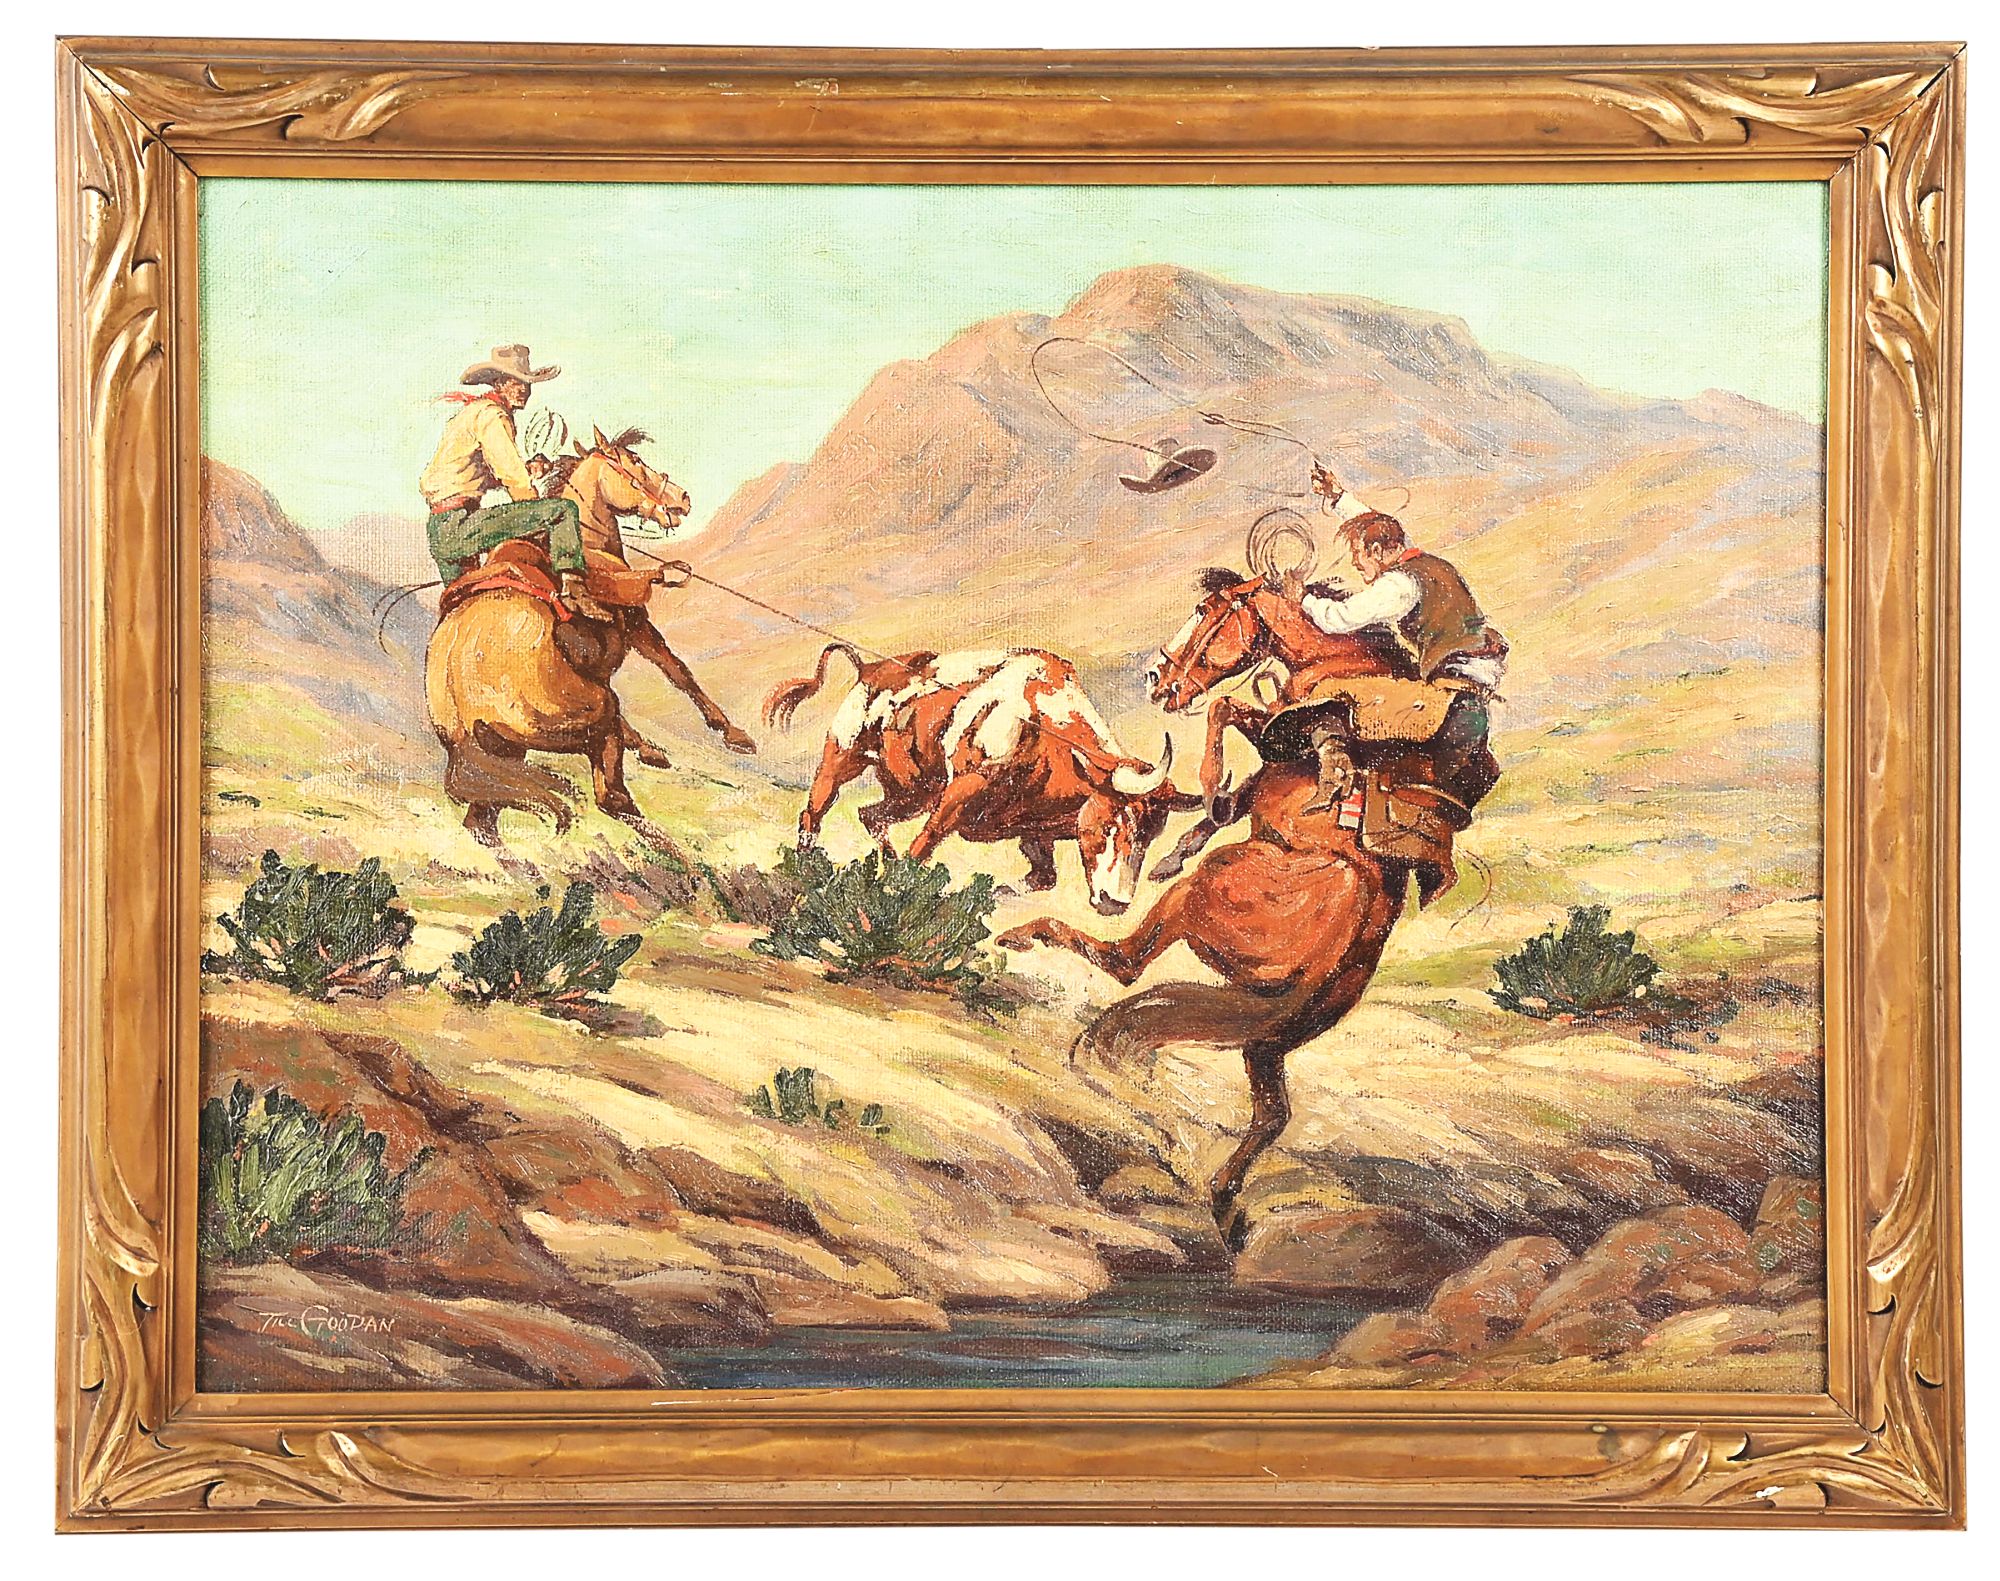 Morphy and Brian Lebel’s Old West Events together lassoed $2.2M auction total